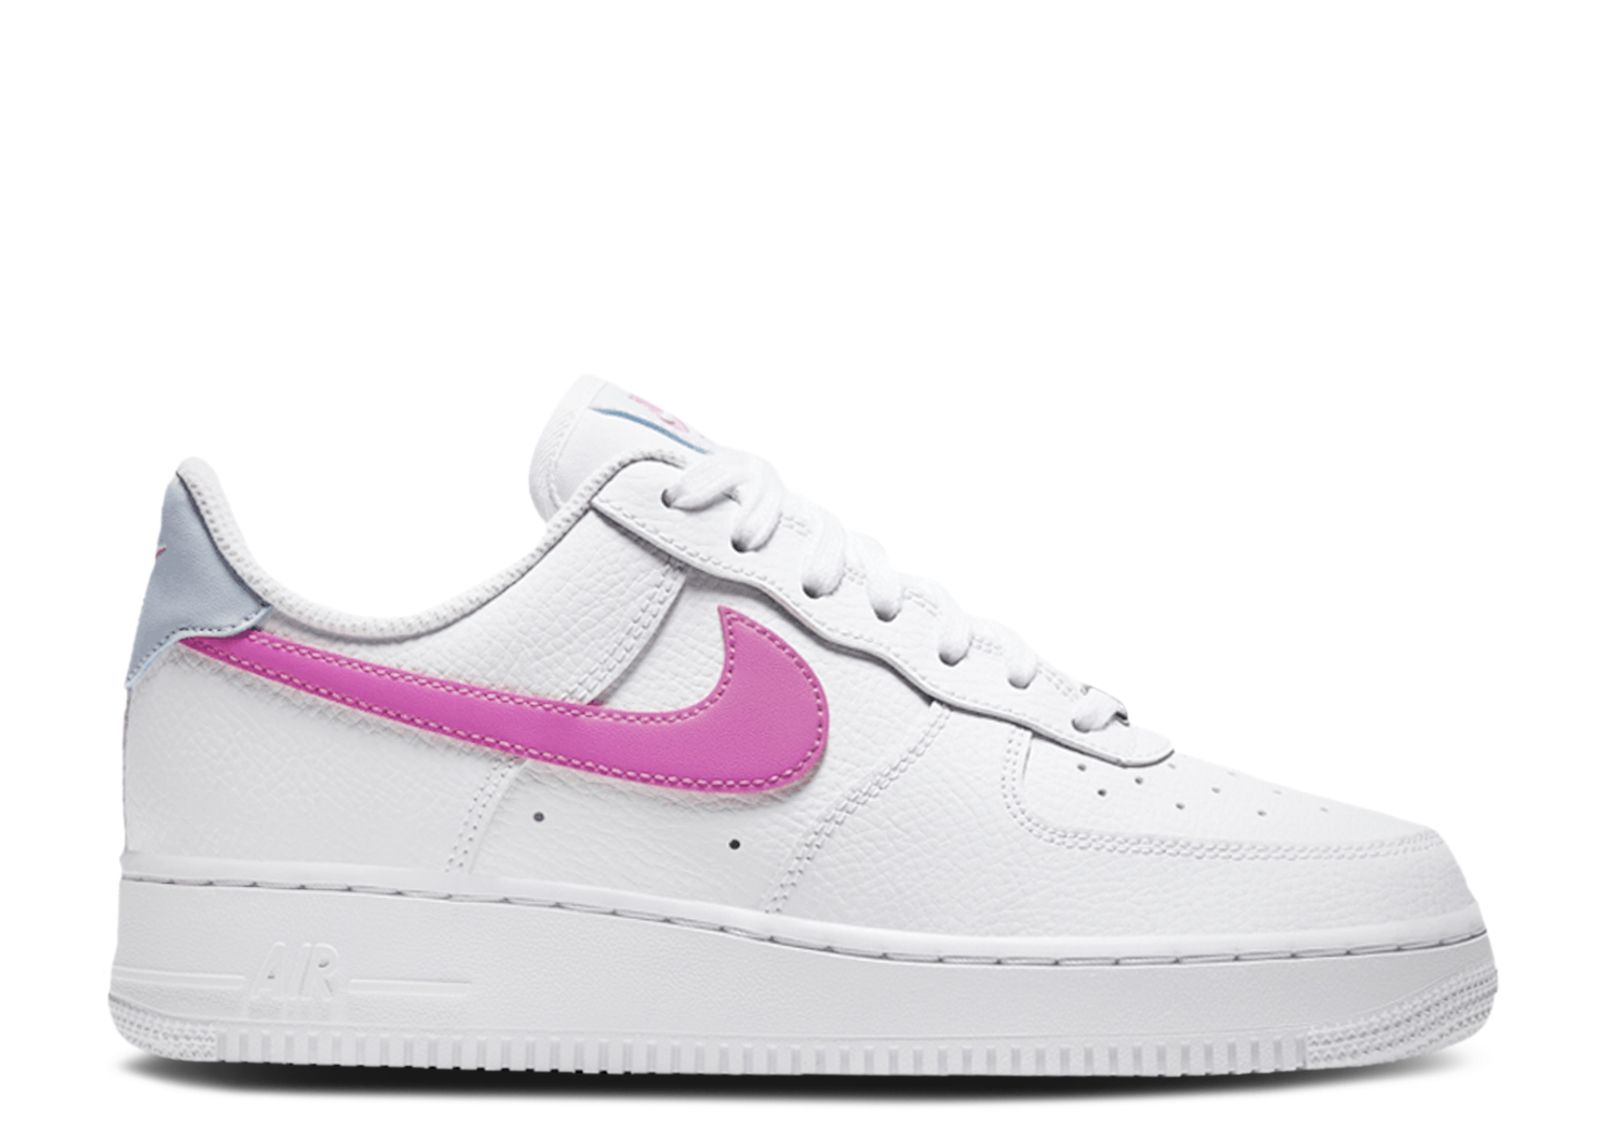 atsushi ohkubo fire force 1 Кроссовки Nike Wmns Air Force 1 Low 'Fire Pink', белый